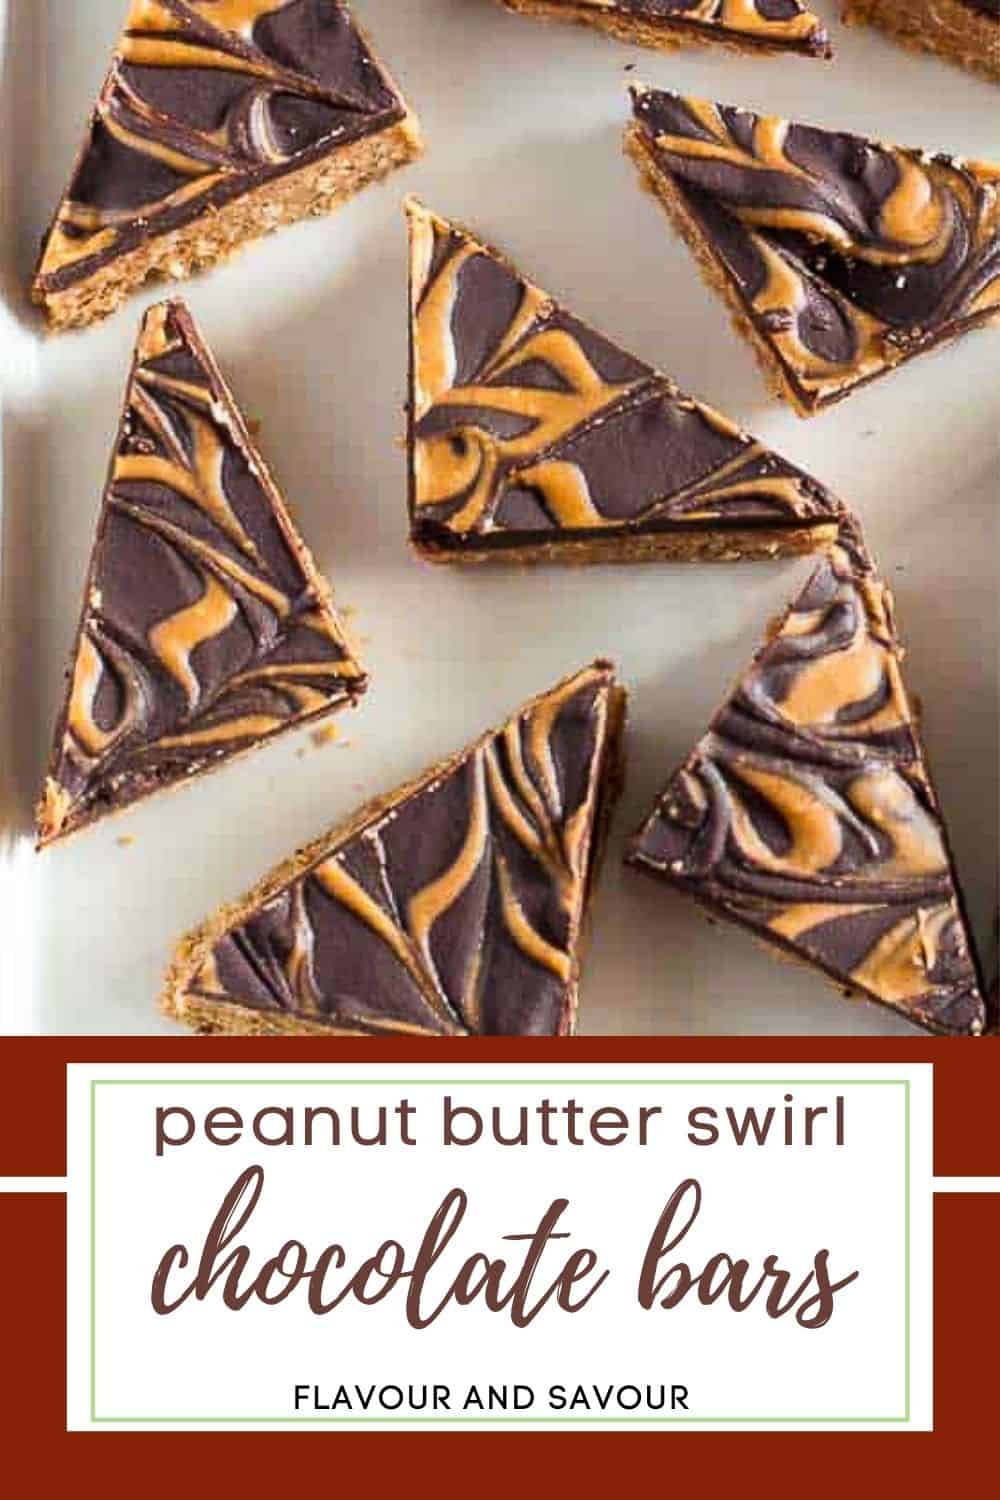 image and text for peanut butter swirl chocolate bars